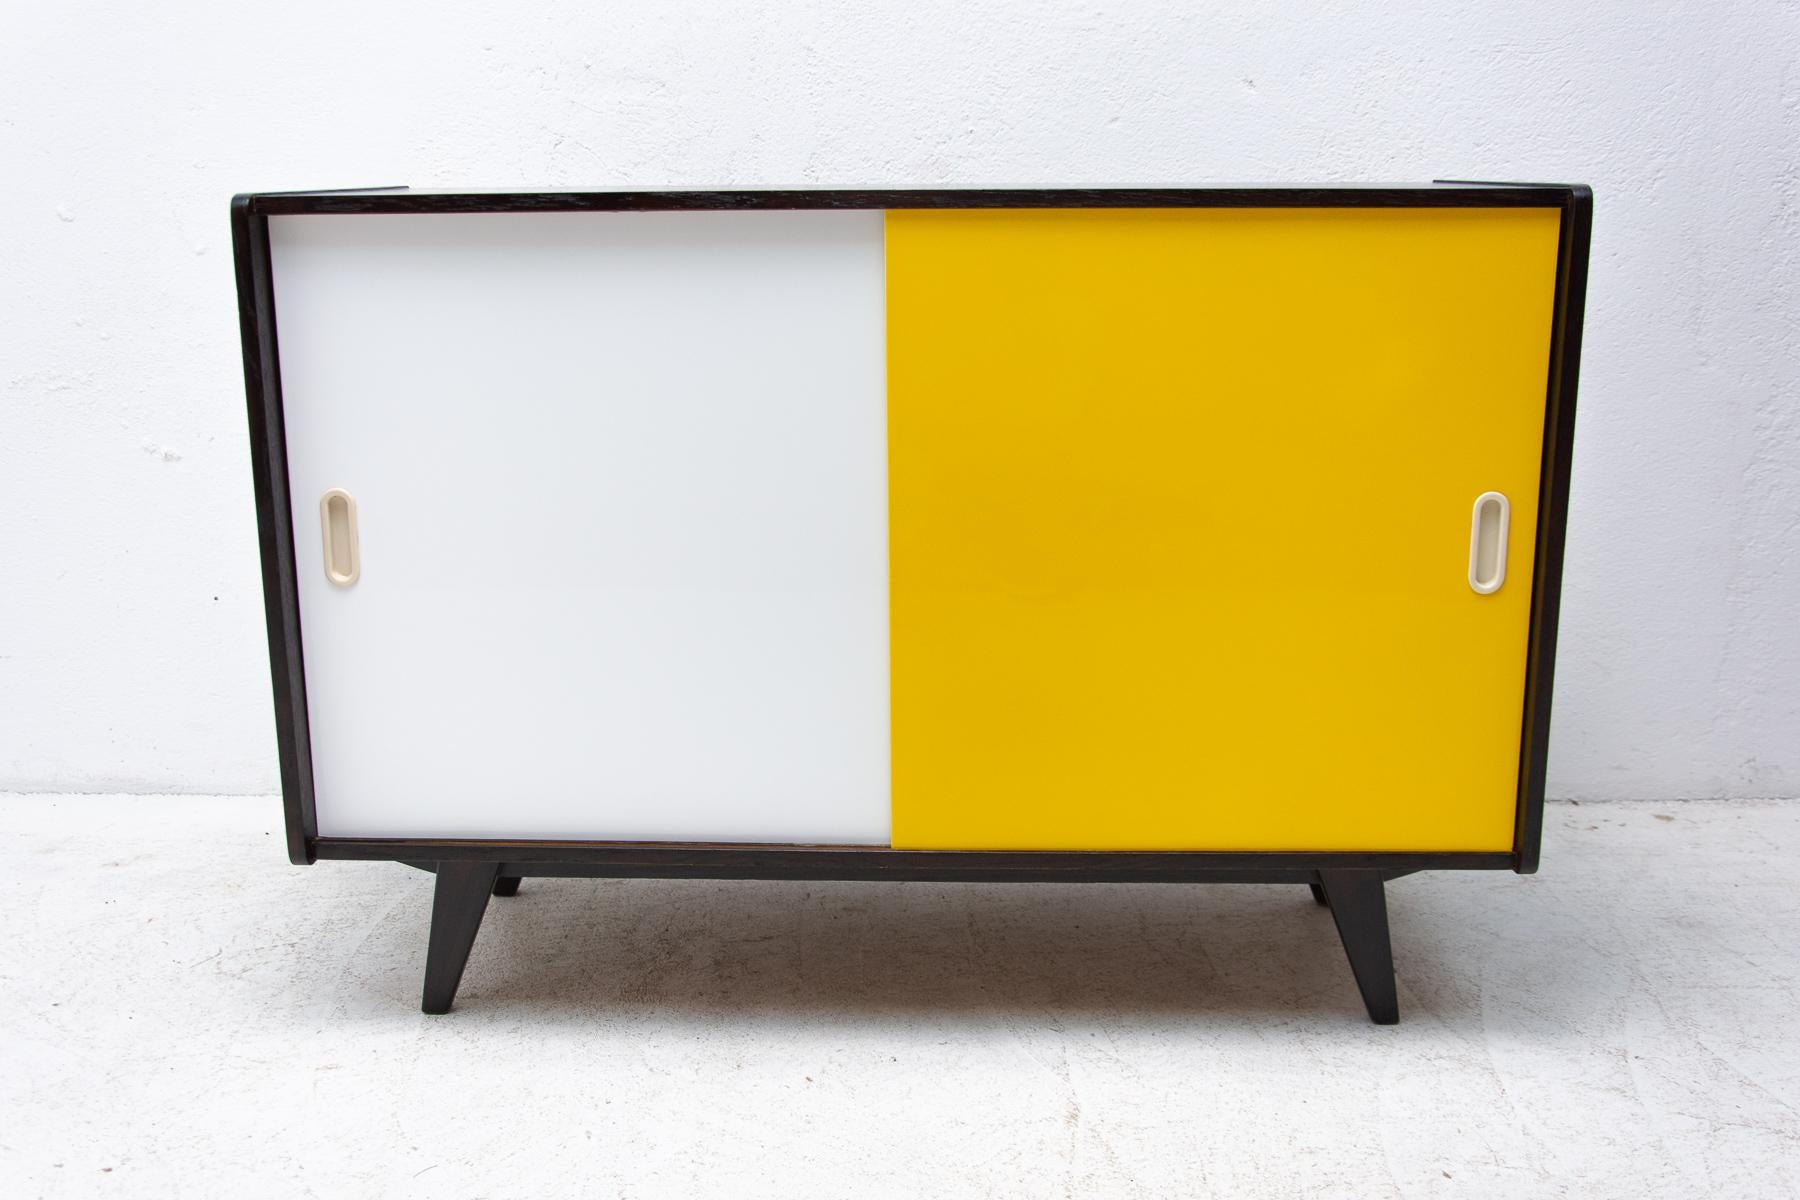 Midcentury sideboard-cabinet with sliding doors, catalogue No. U-452, designed by Jiri Jiroutek. It´s made of beechwood, veneer, plywood and laminate. In excellent condition, fully refurbished.

The cabinet comes from the famous Universal series